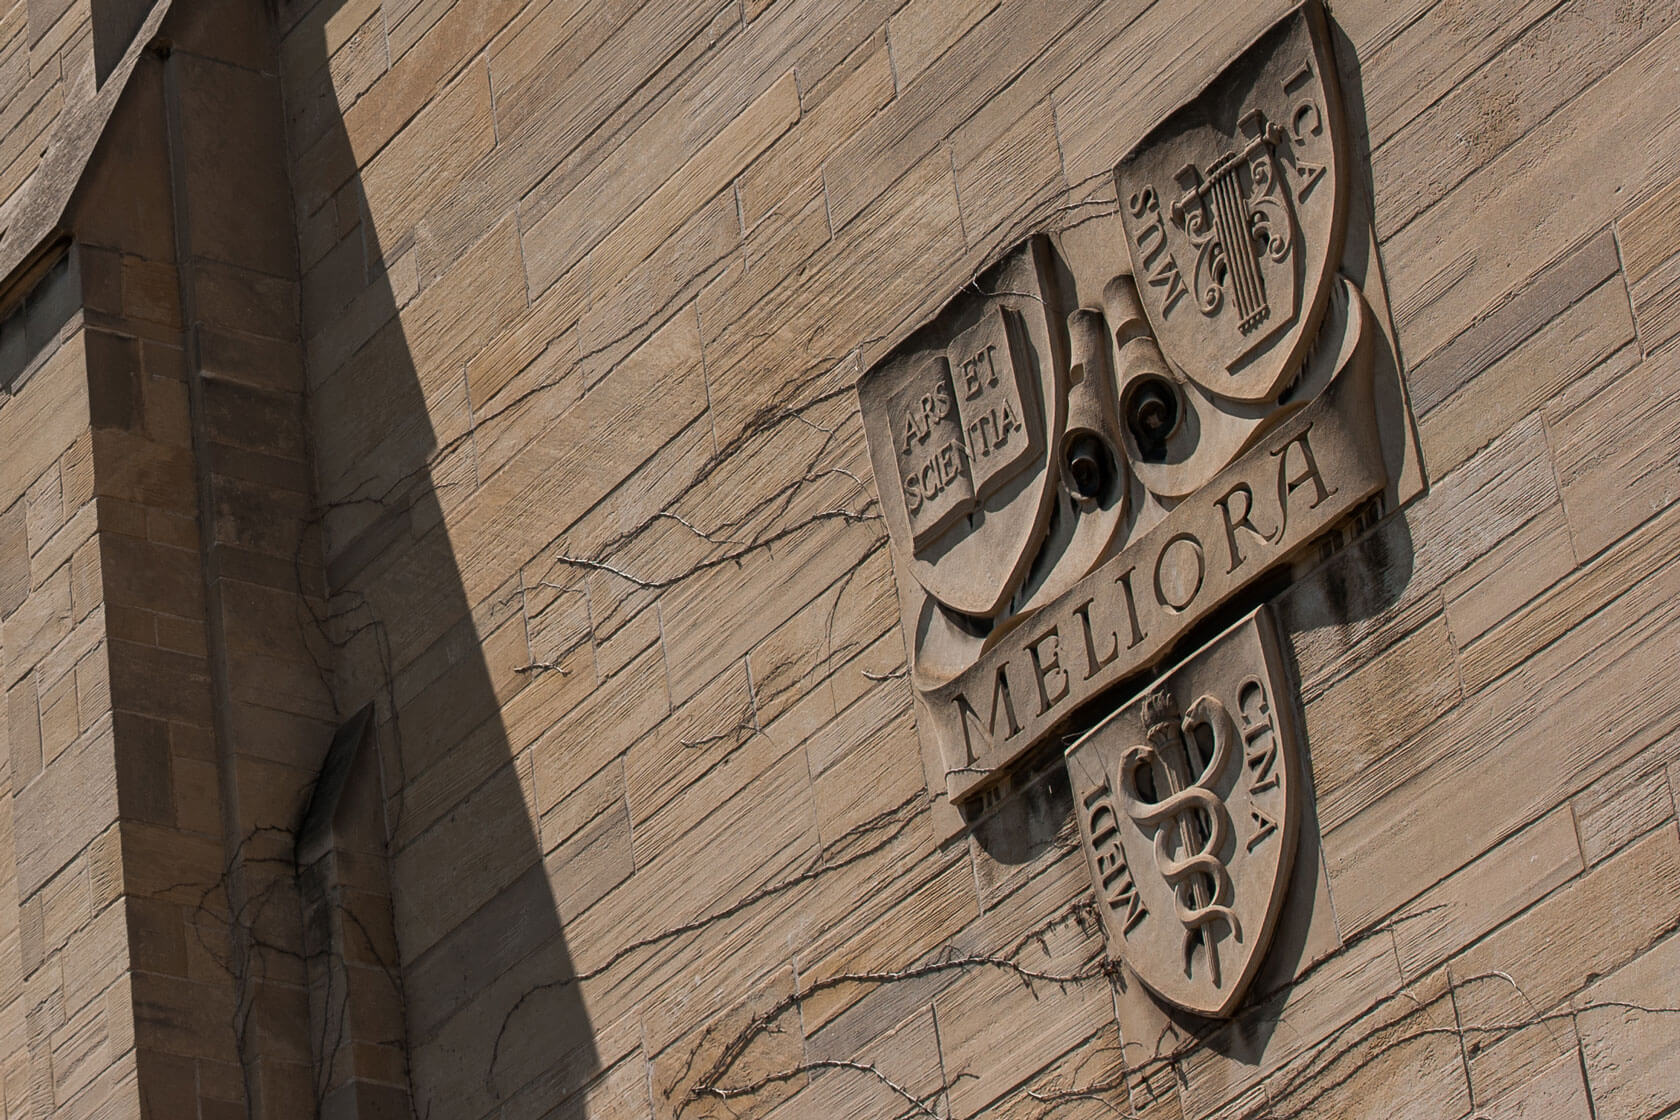 A close up of the University's crest carved into the Memorial Art Gallery